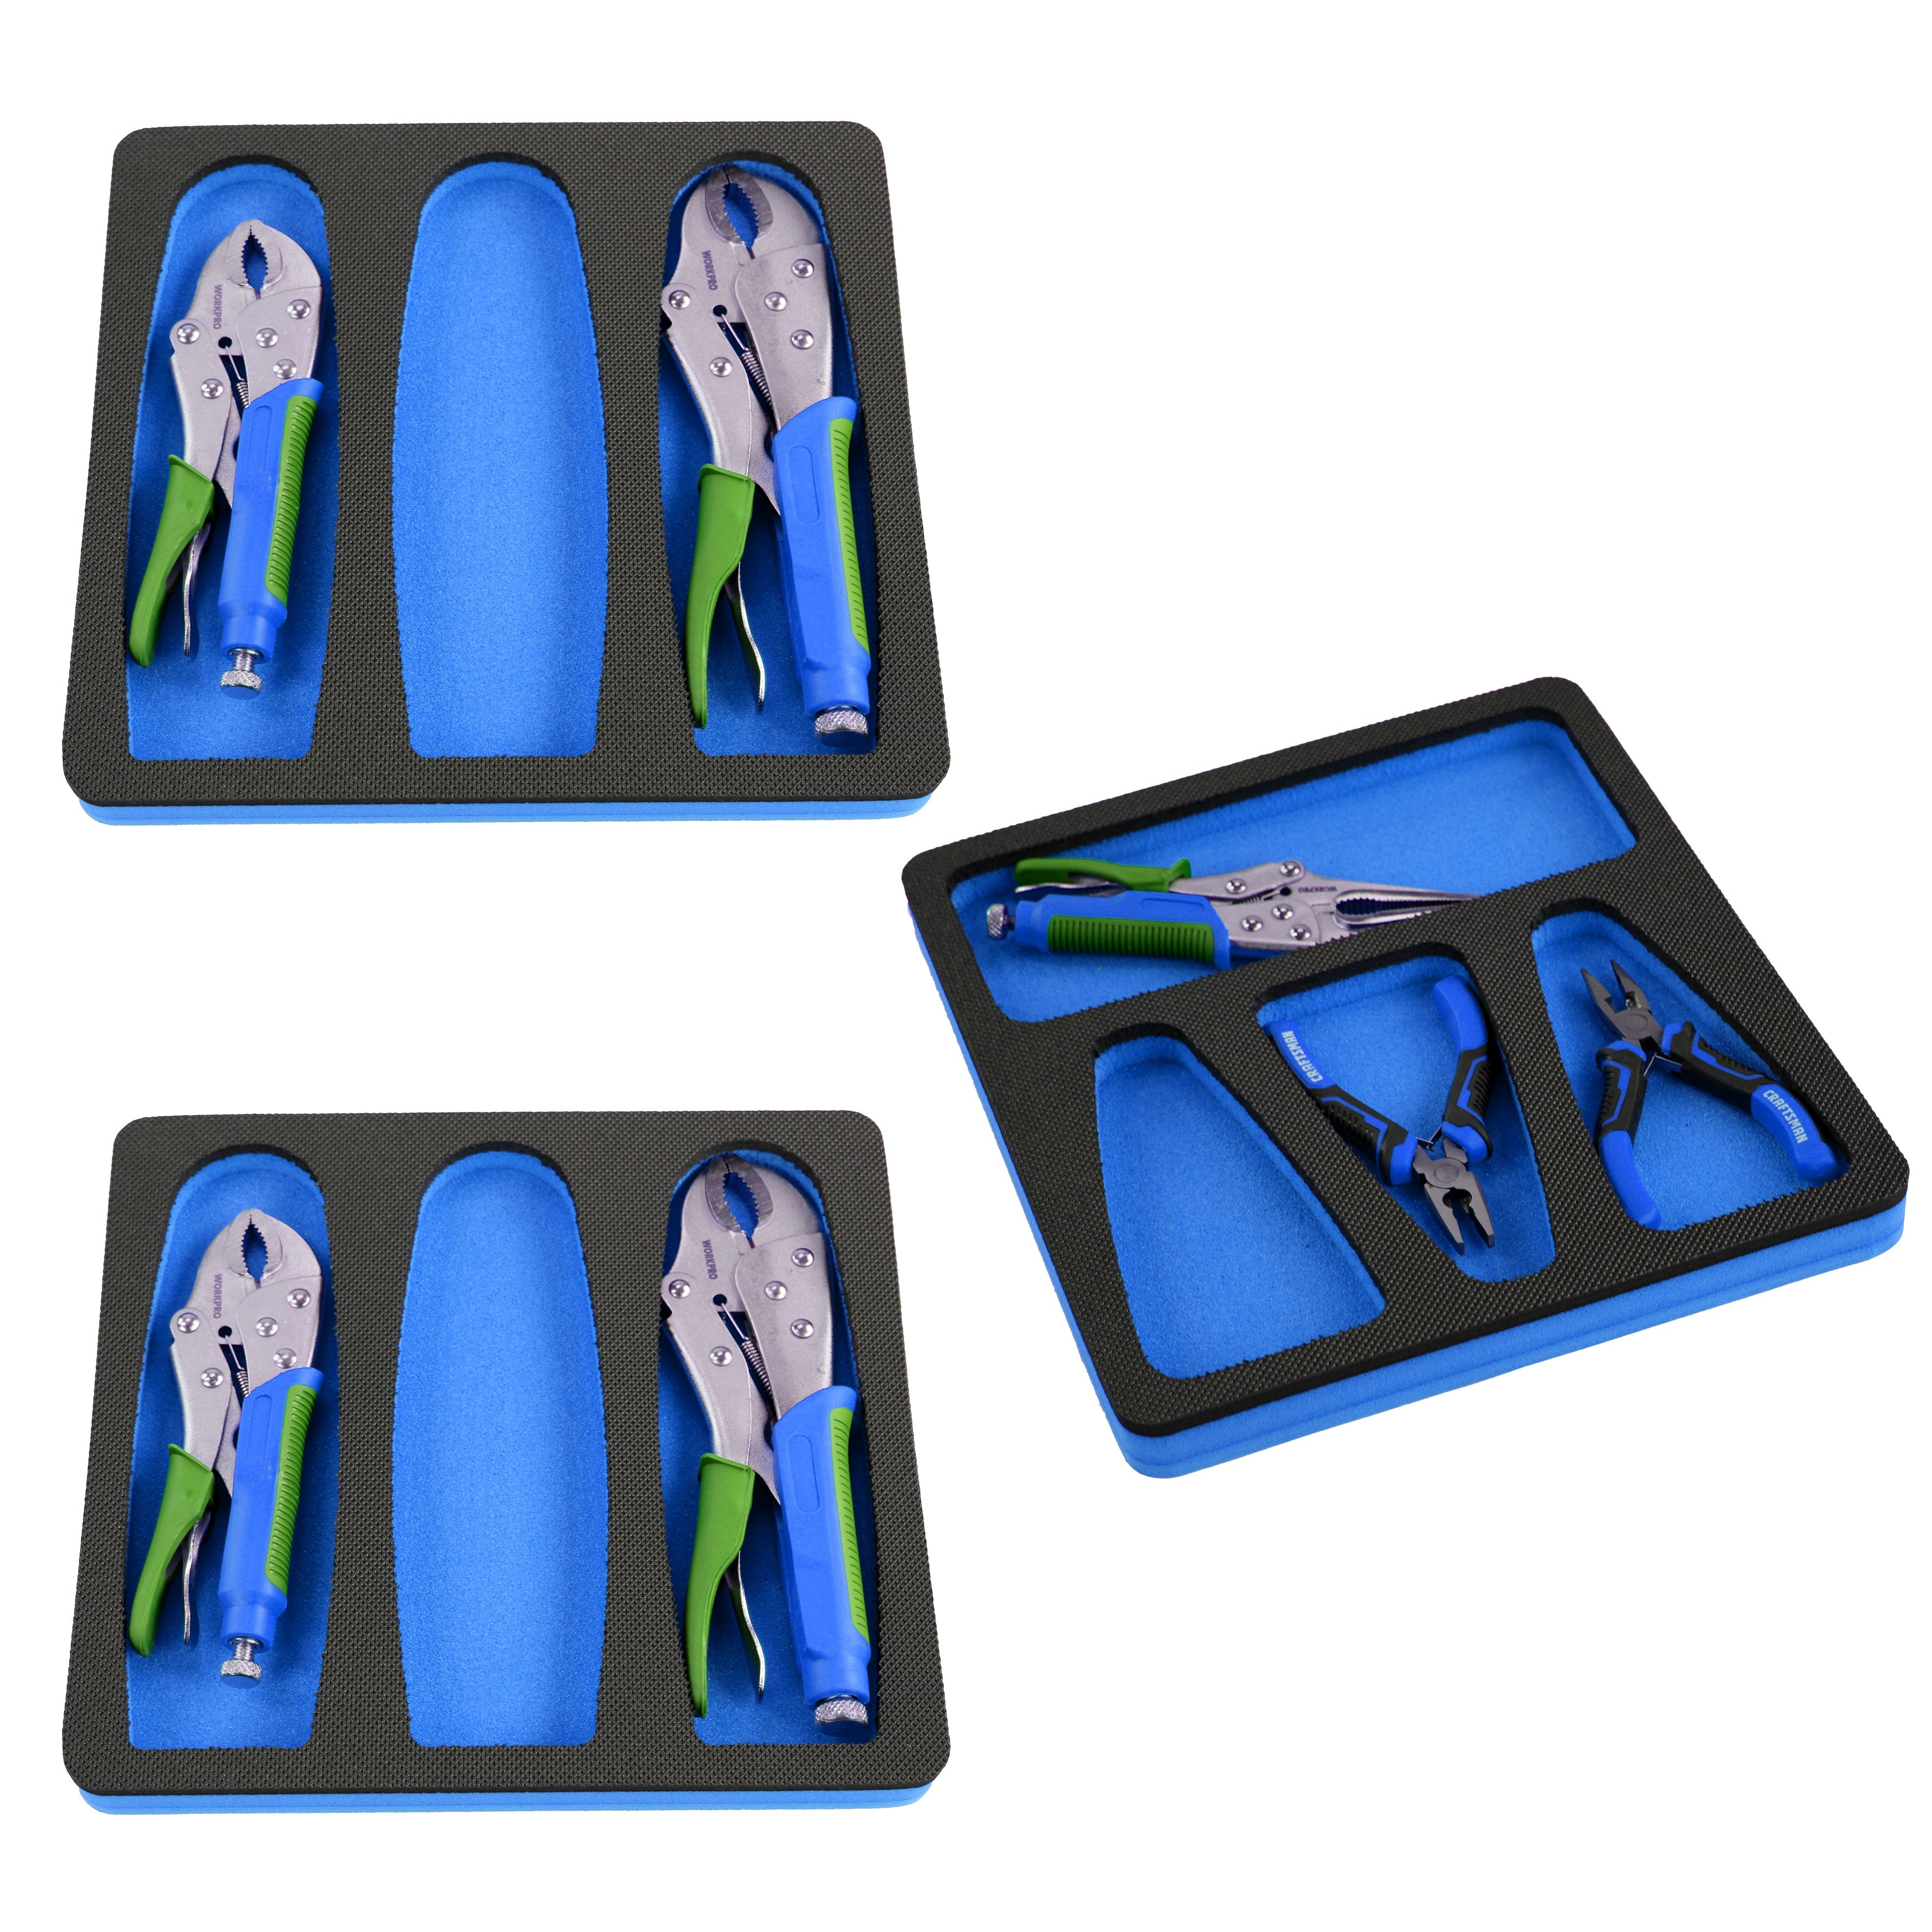 Tool Drawer Organizer 3-Piece Pliers Insert Set Blue and Black Durable Foam Holds Many Tools and Accessories 10 x 11 Inch Trays Fits Craftsman Husky Kobalt Milwaukee Many Others